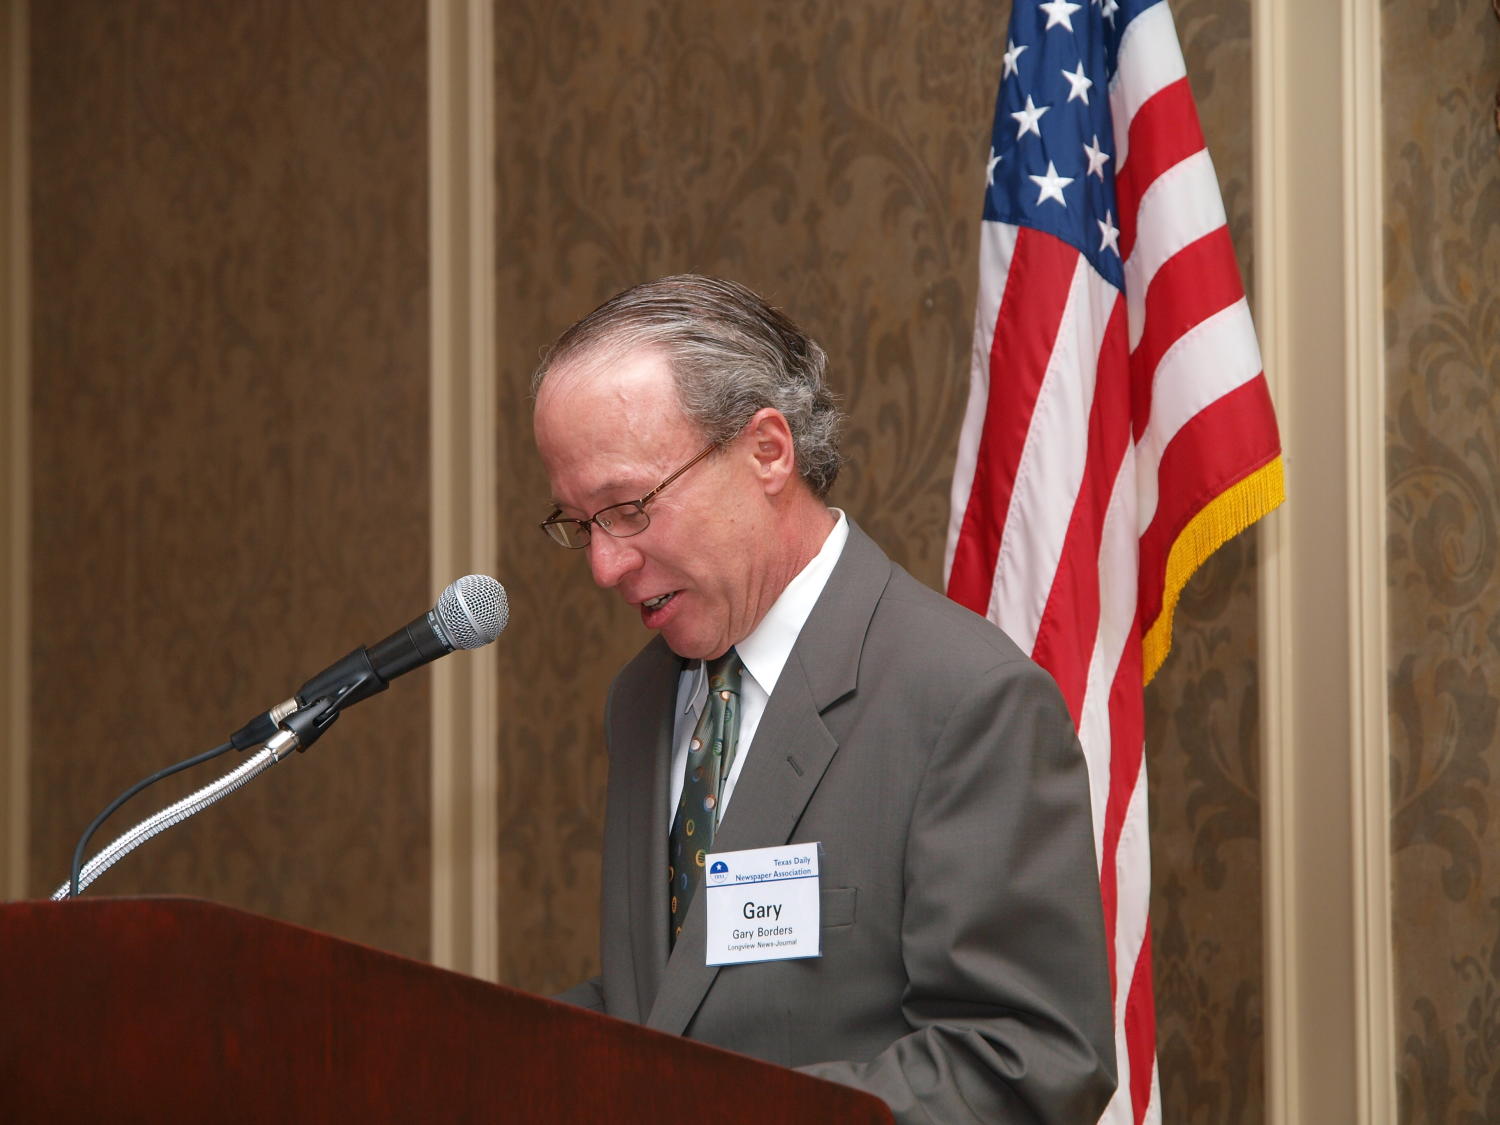 [Gary Borders speaking into mic during TDNA award ceremony], Photograph of Gary Borders standing at a podium and speaking into the microphone during the award ceremony at the 2008 Texas Daily Newspaper Association annual conference awards dinner, held at The Westin Riverwalk Hotel in San Antonio, Texas., 